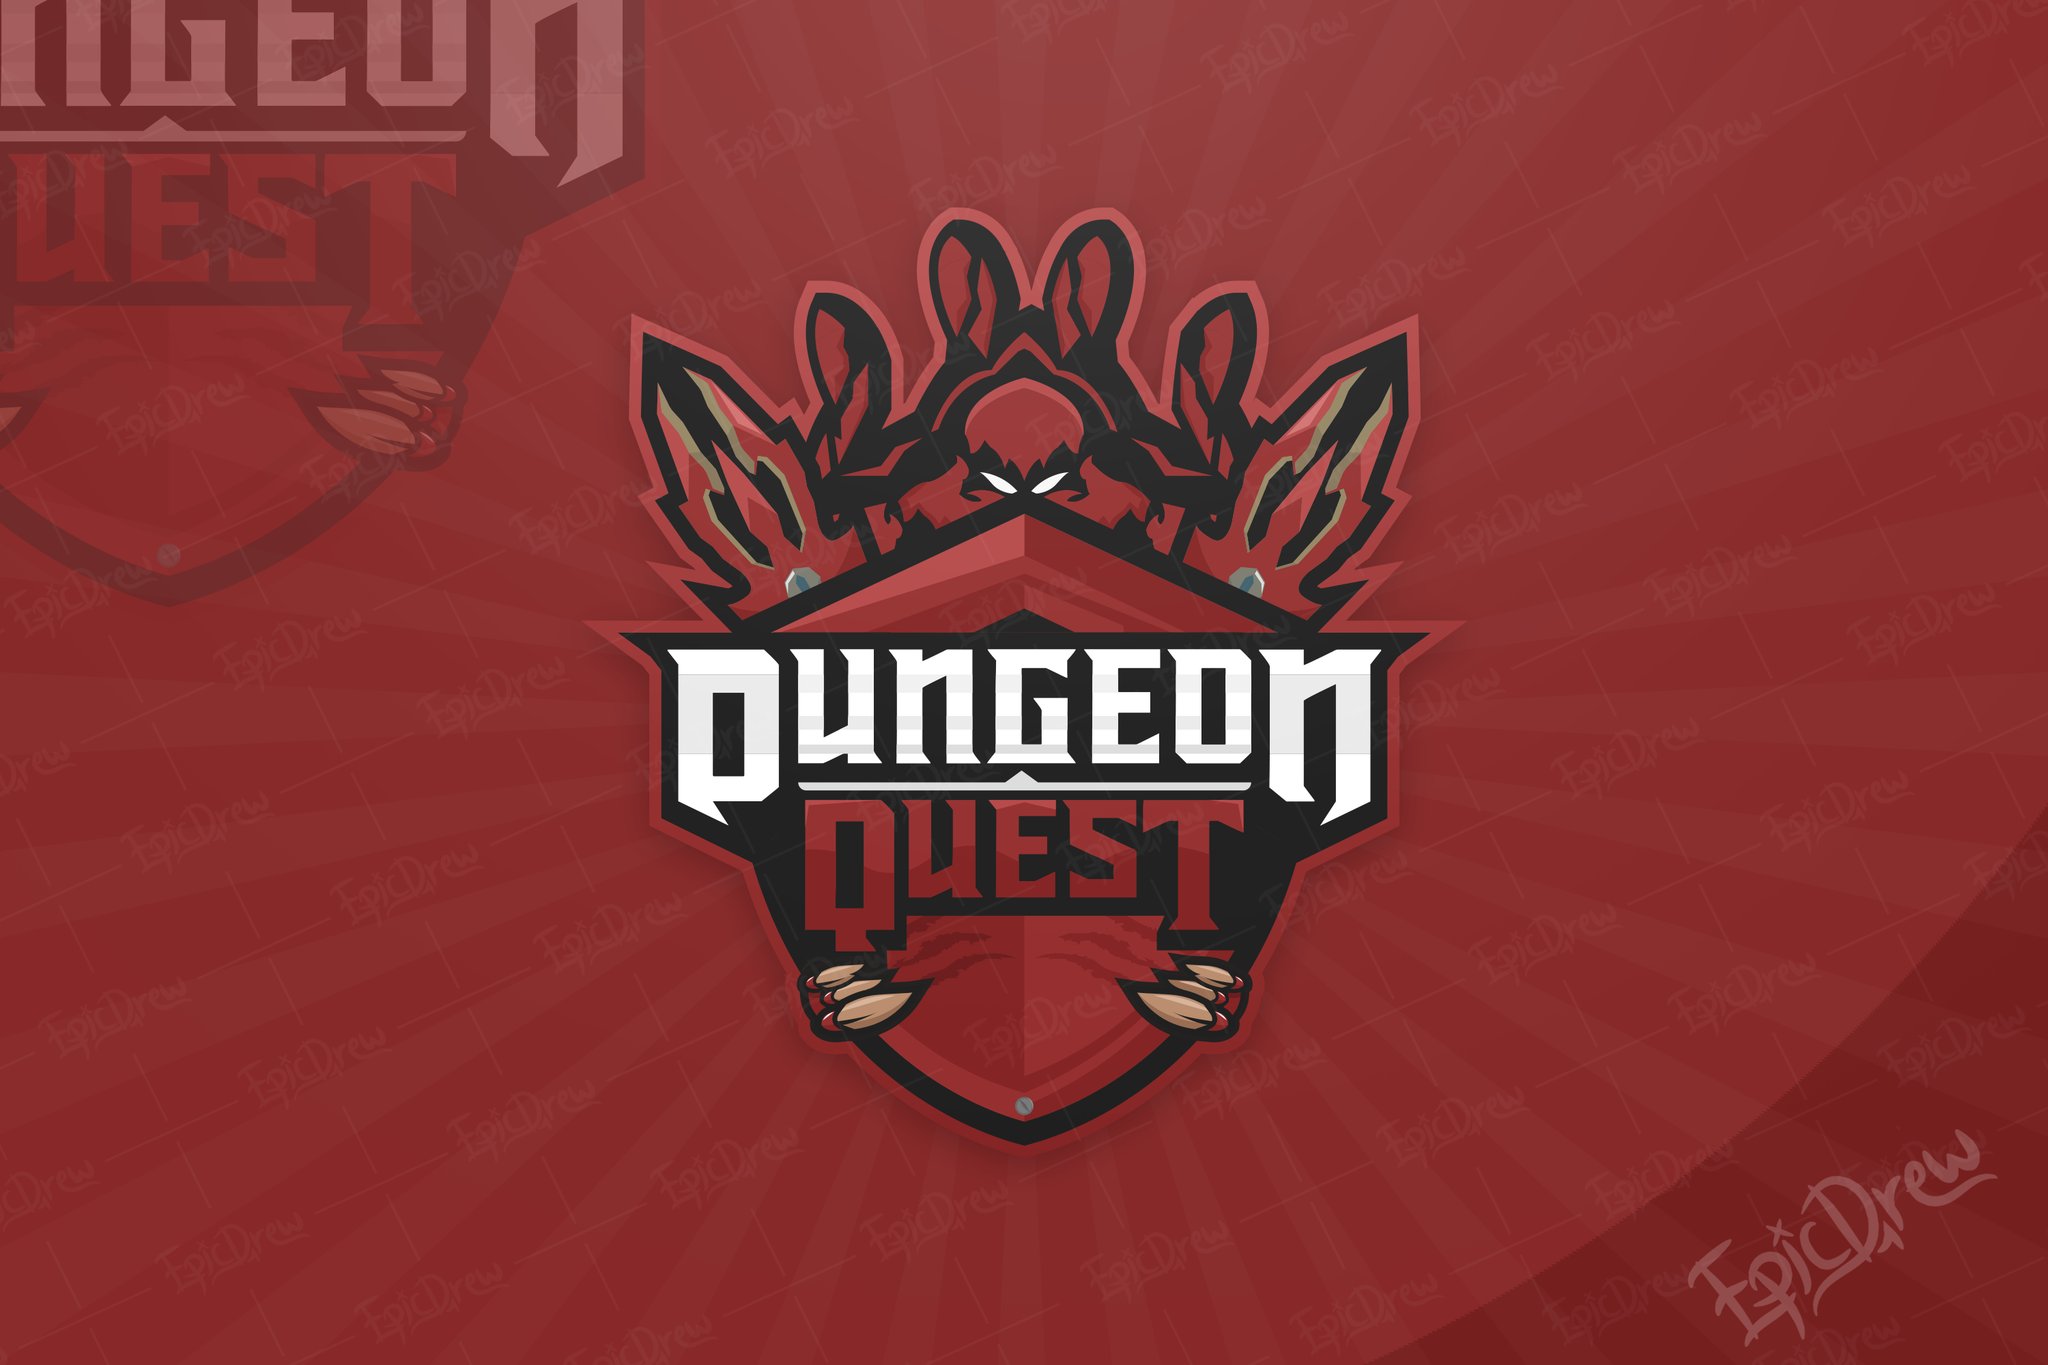 Ep1cdrew On Twitter Demons Commission Logo For The Game Dungeon Quest Demon Theme Had A Lot Of Fun Making This S Rt S Appreciated Robloxdev Roblox Known Members Devs Vcaffy Https T Co 9hl2sebgqy - dungeon quest roblox underworld